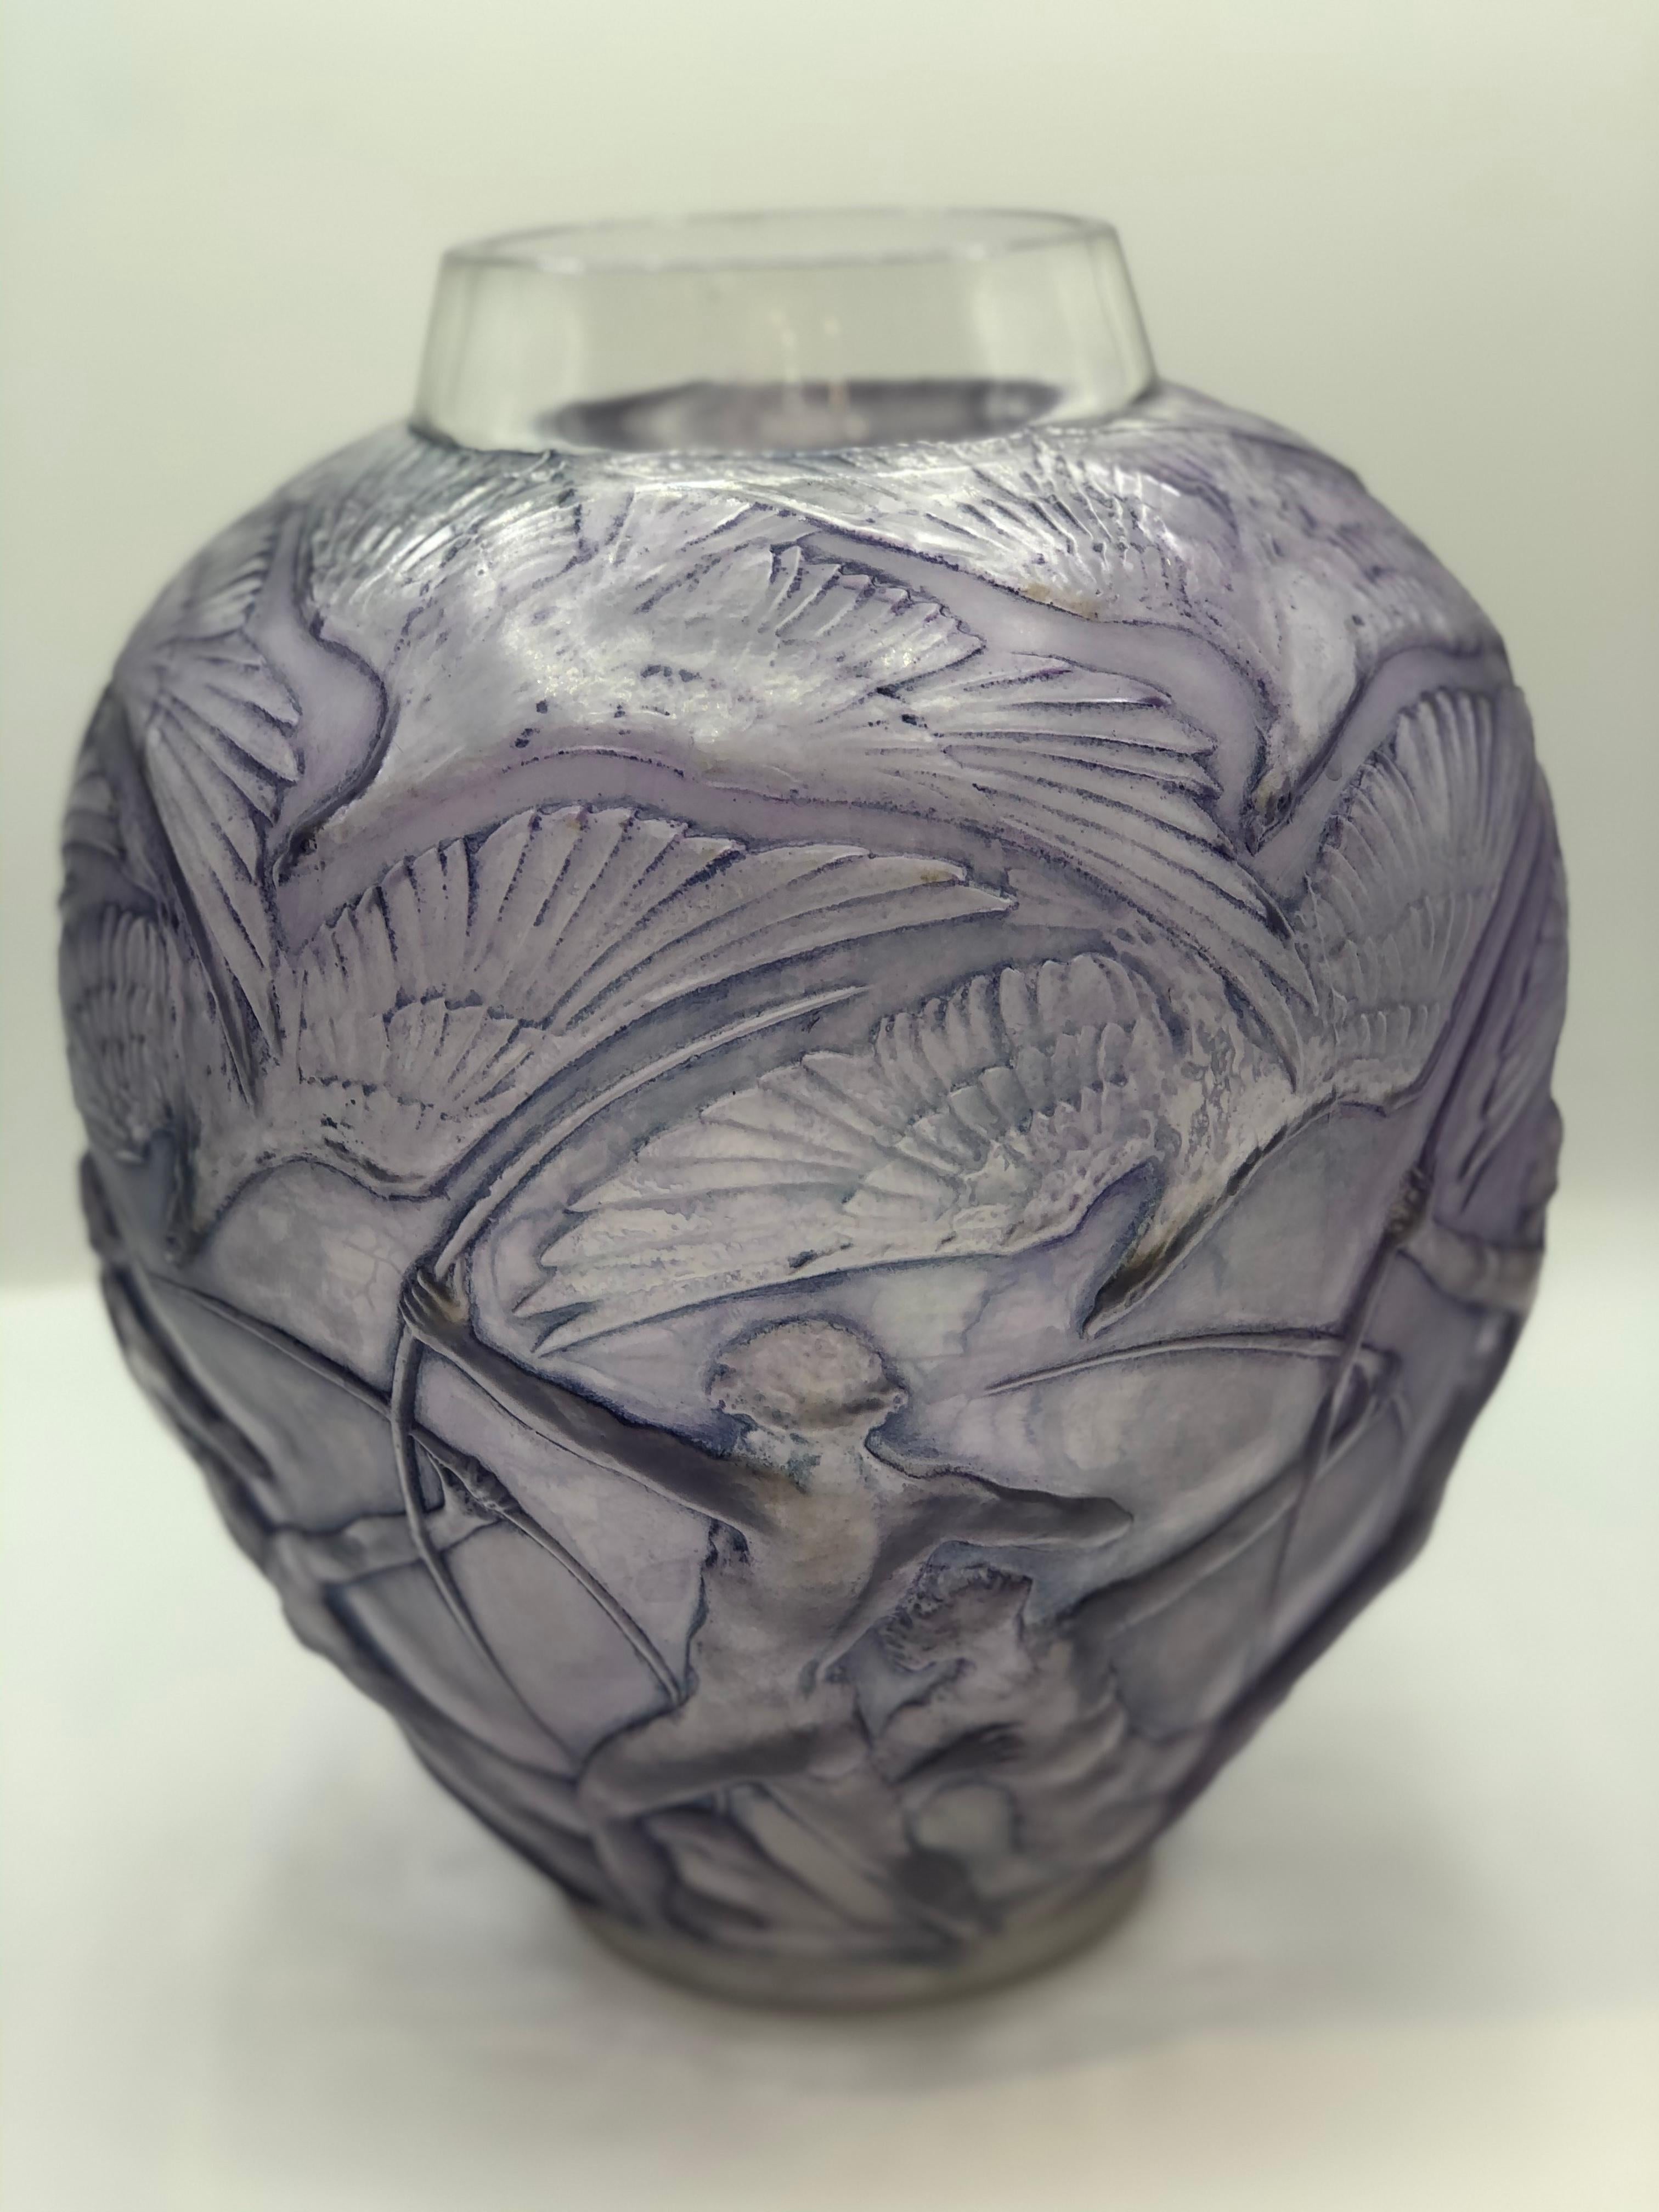 Rene. Lalique: Vase having an all-over design of nude bowmen aiming arrows at large swooping overhead birds. 28cm tall clear, frosted, and patinated purple glass.
model cretated et producted from 1921 to 1947.